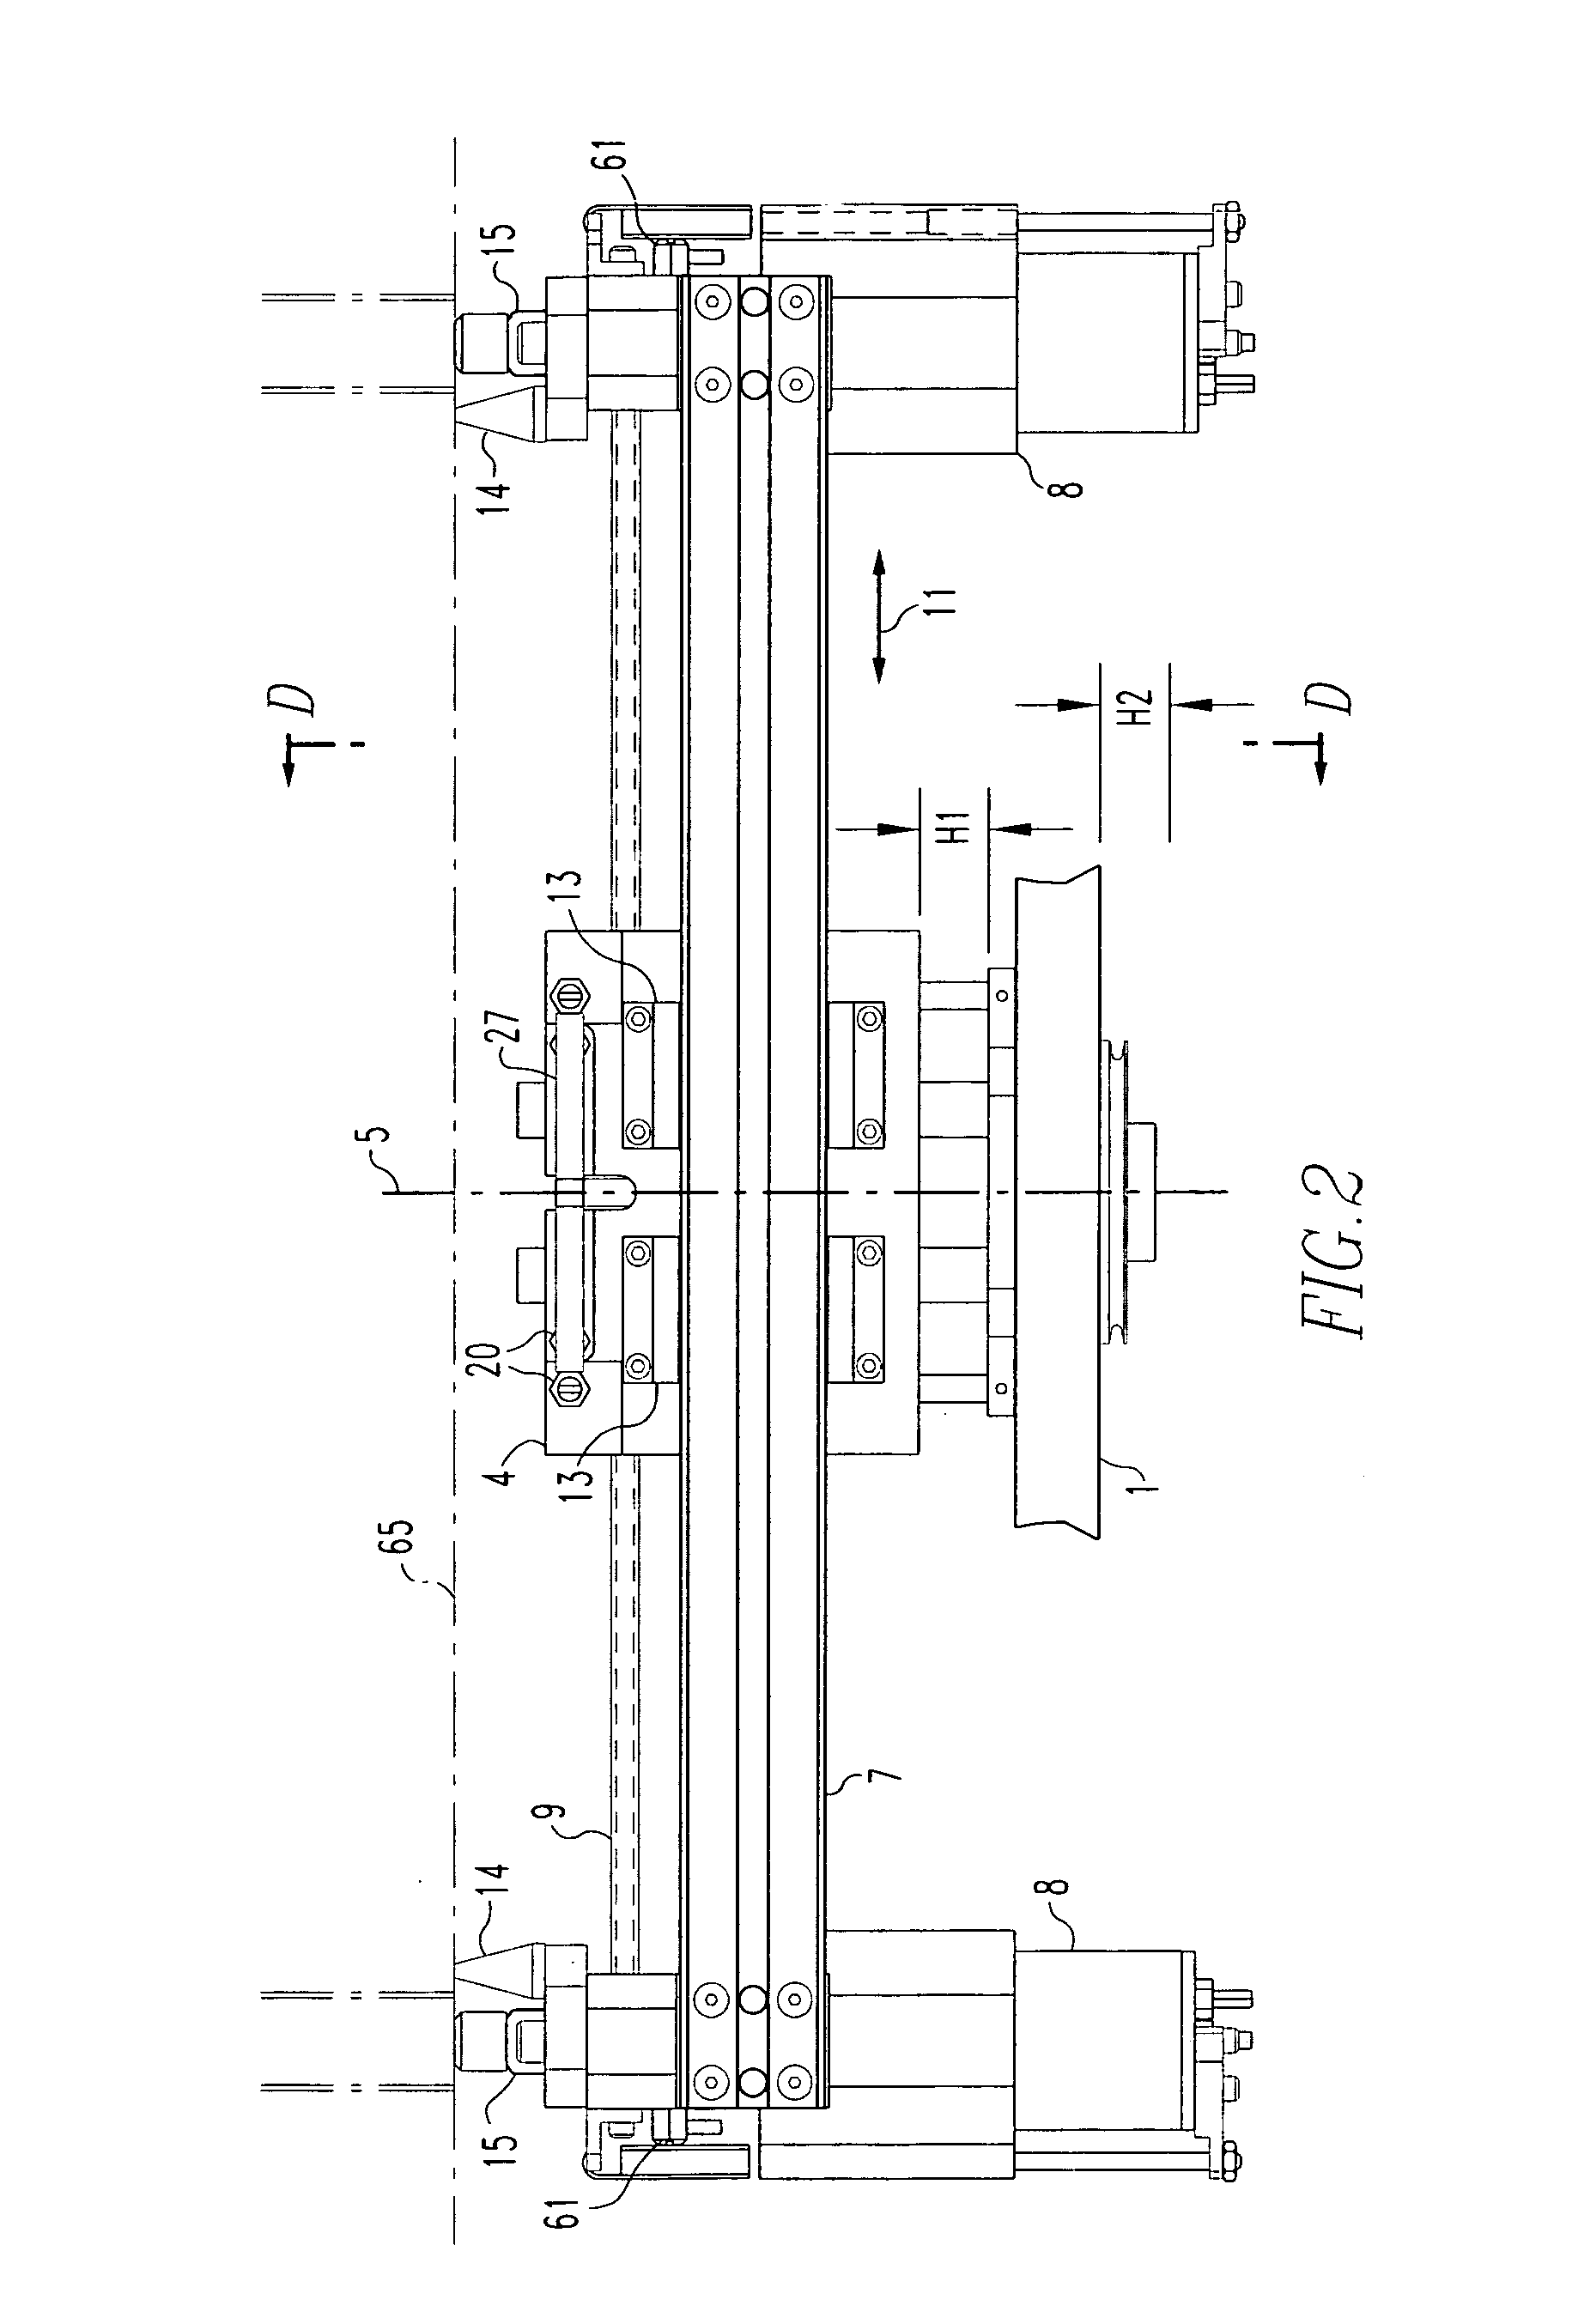 Miniature manipulator for servicing the interior of nuclear steam generator tubes